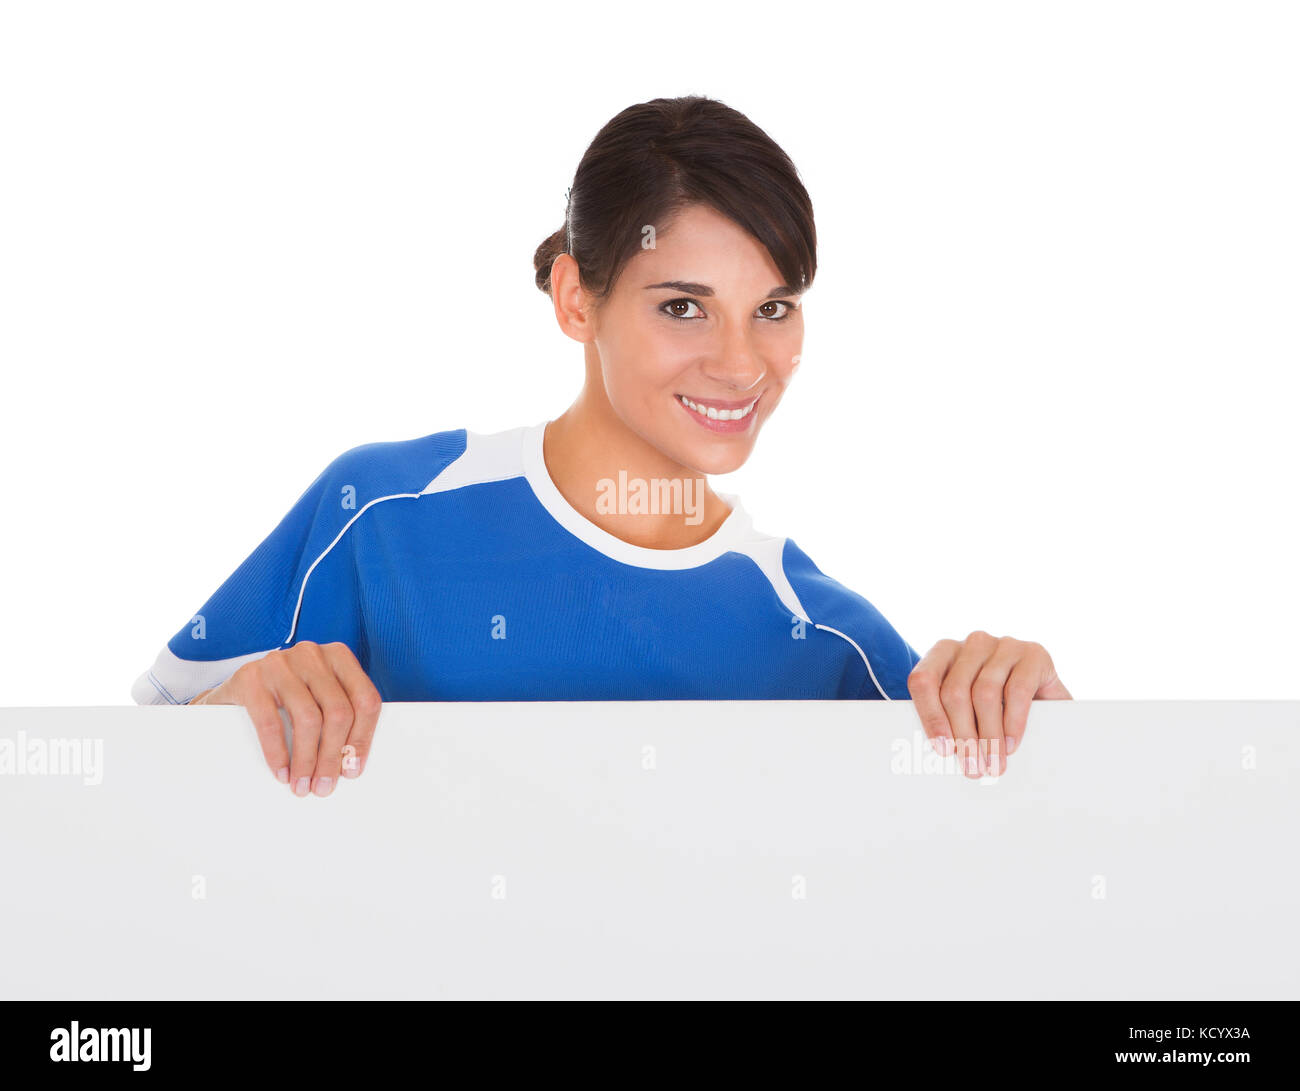 Young Happy Woman Holding Placard Over White Background Stock Photo